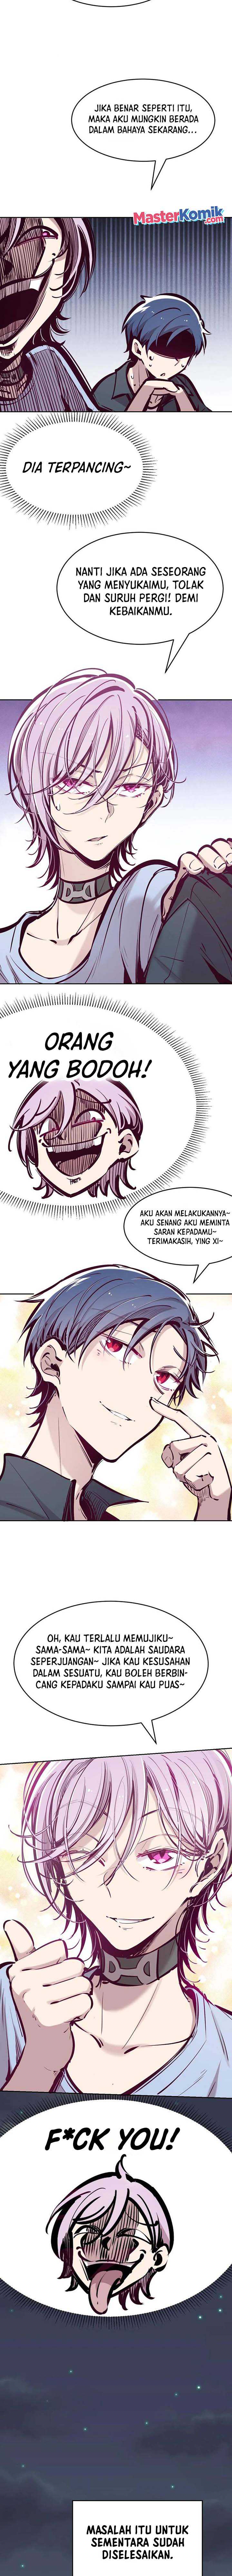 Demon X Angel, Can’t Get Along! Chapter 52